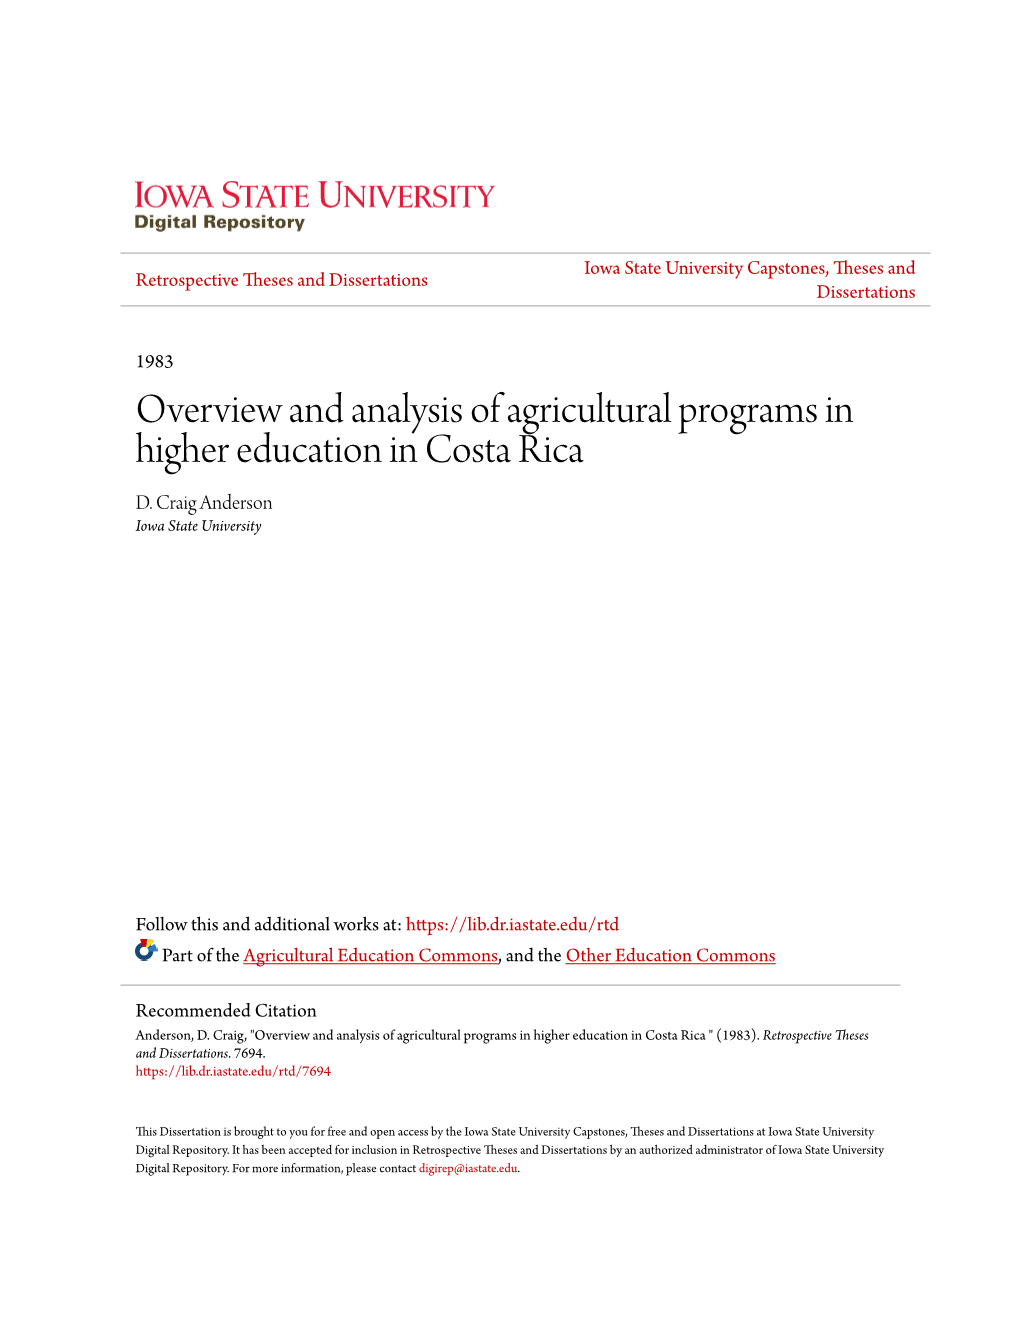 Overview and Analysis of Agricultural Programs in Higher Education in Costa Rica D